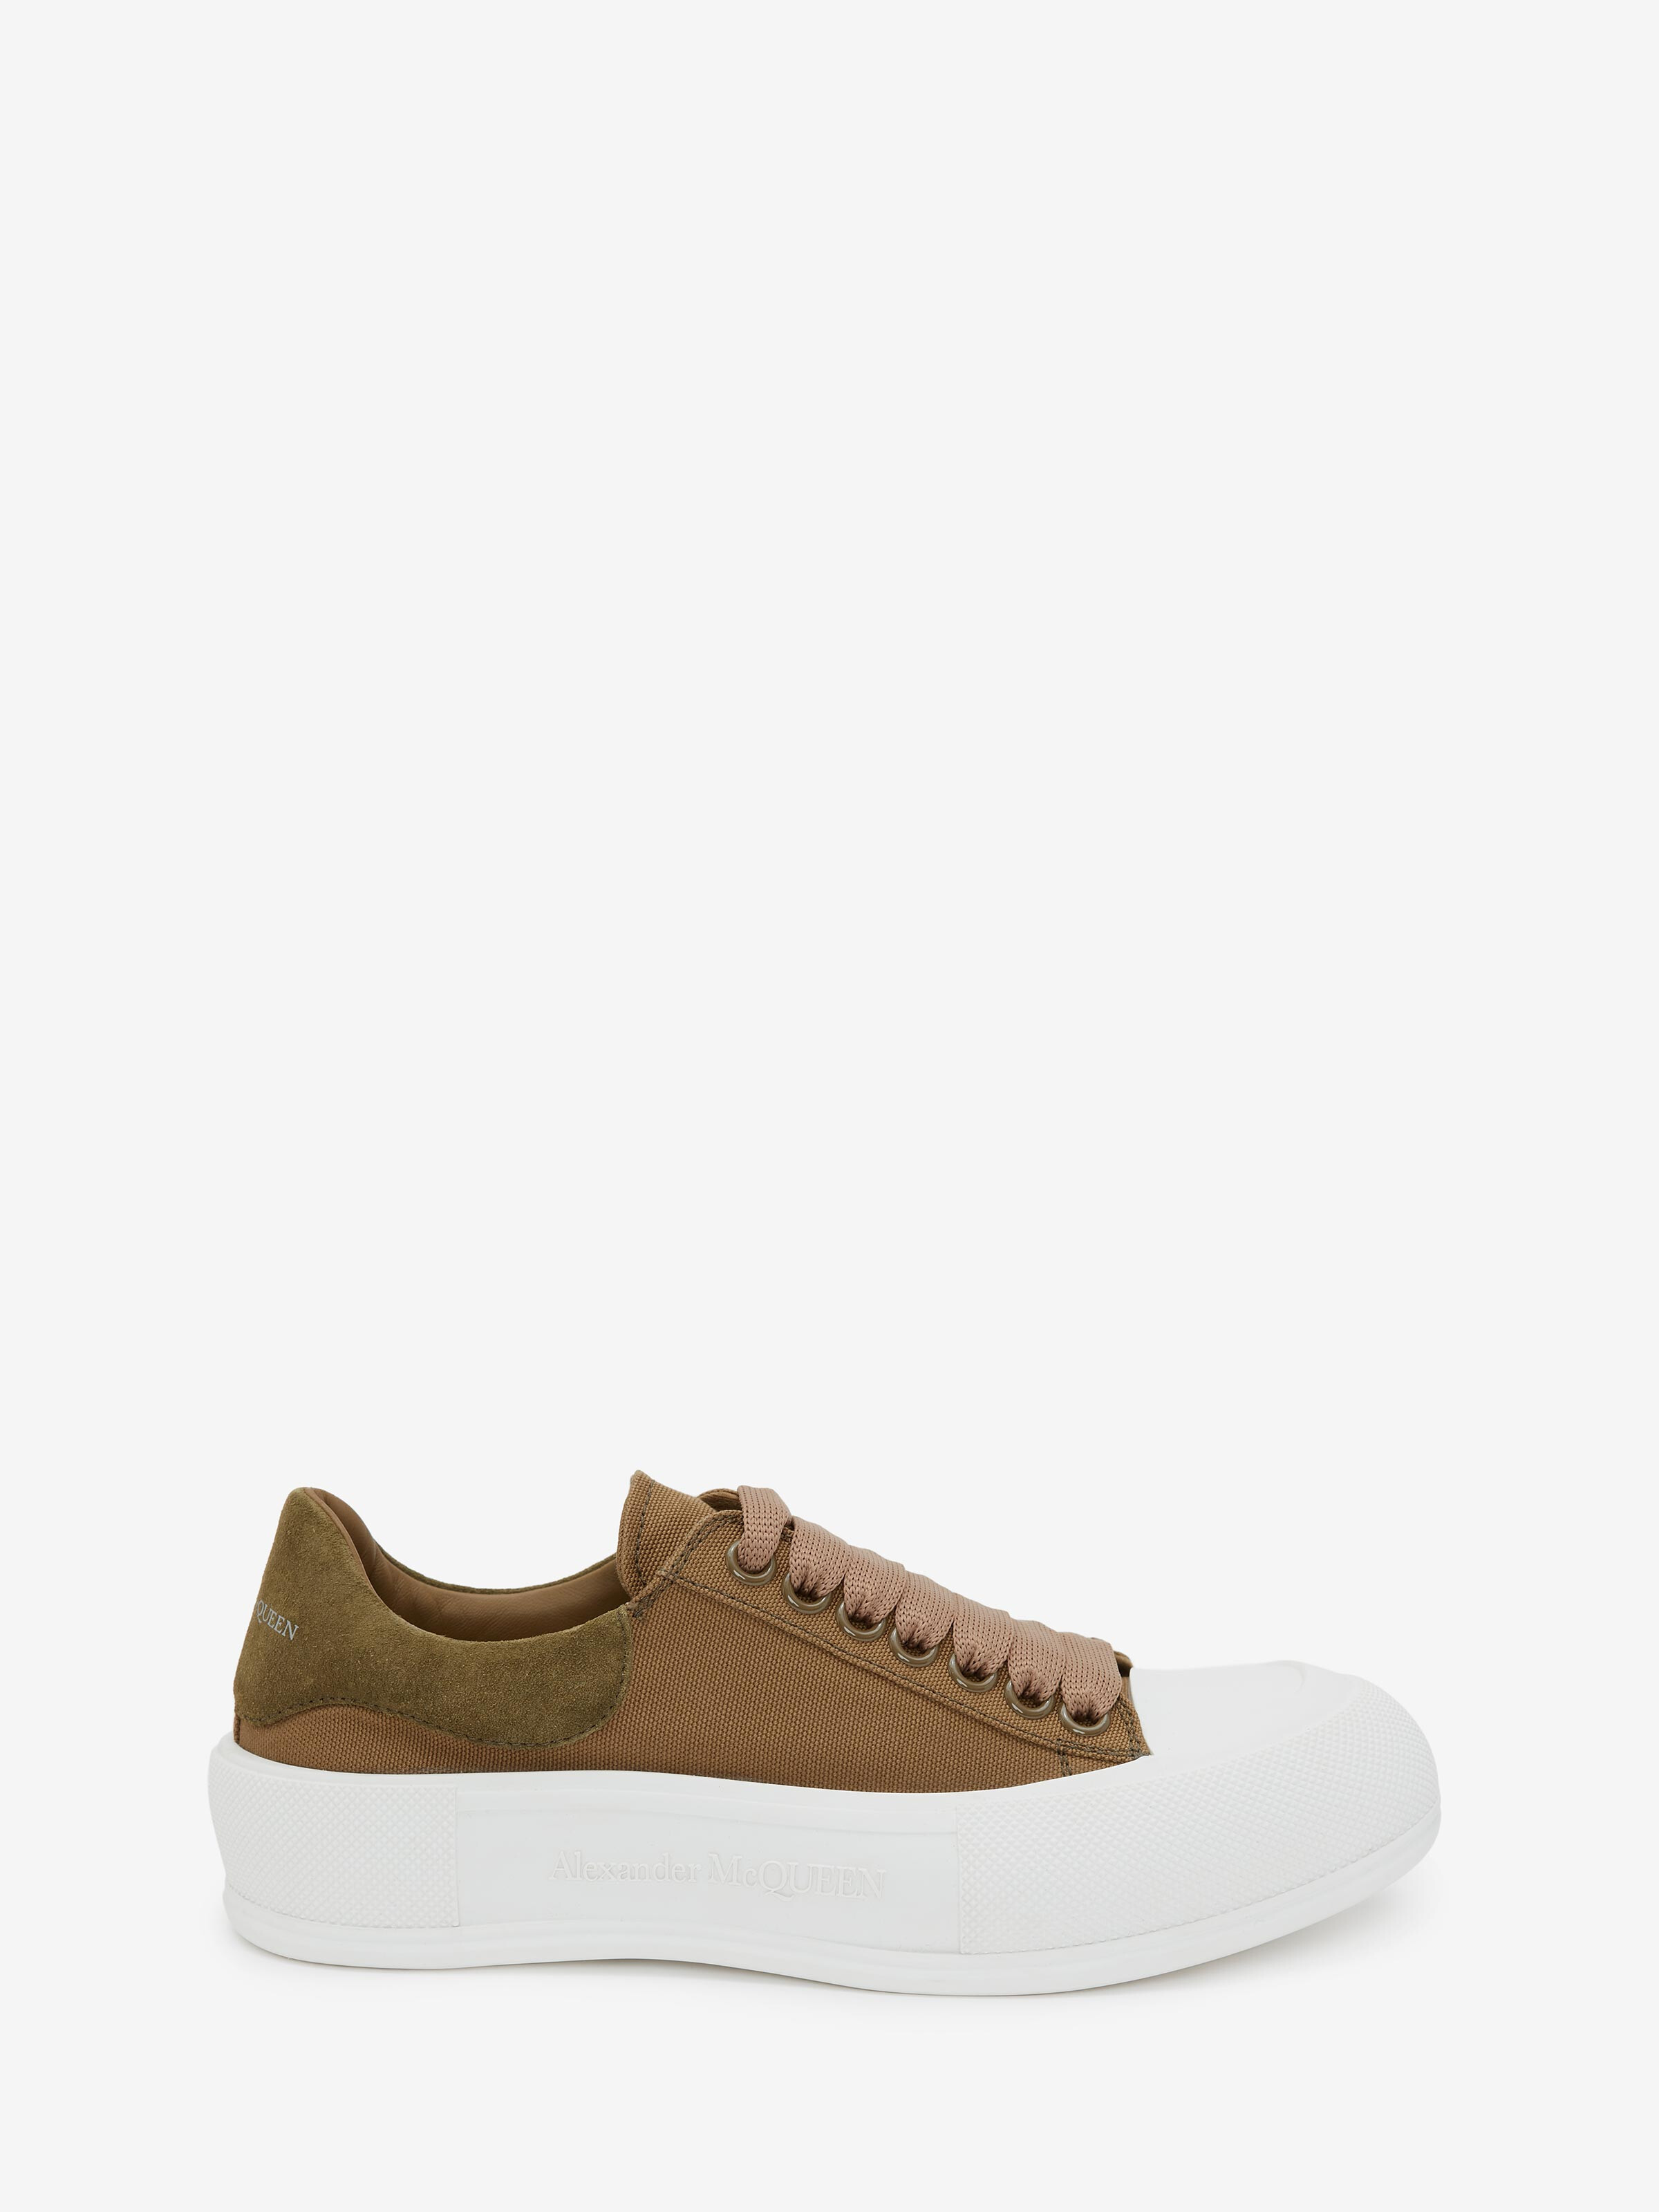 Alexander Mcqueen Deck Lace Up Plimsoll In Khaki/white